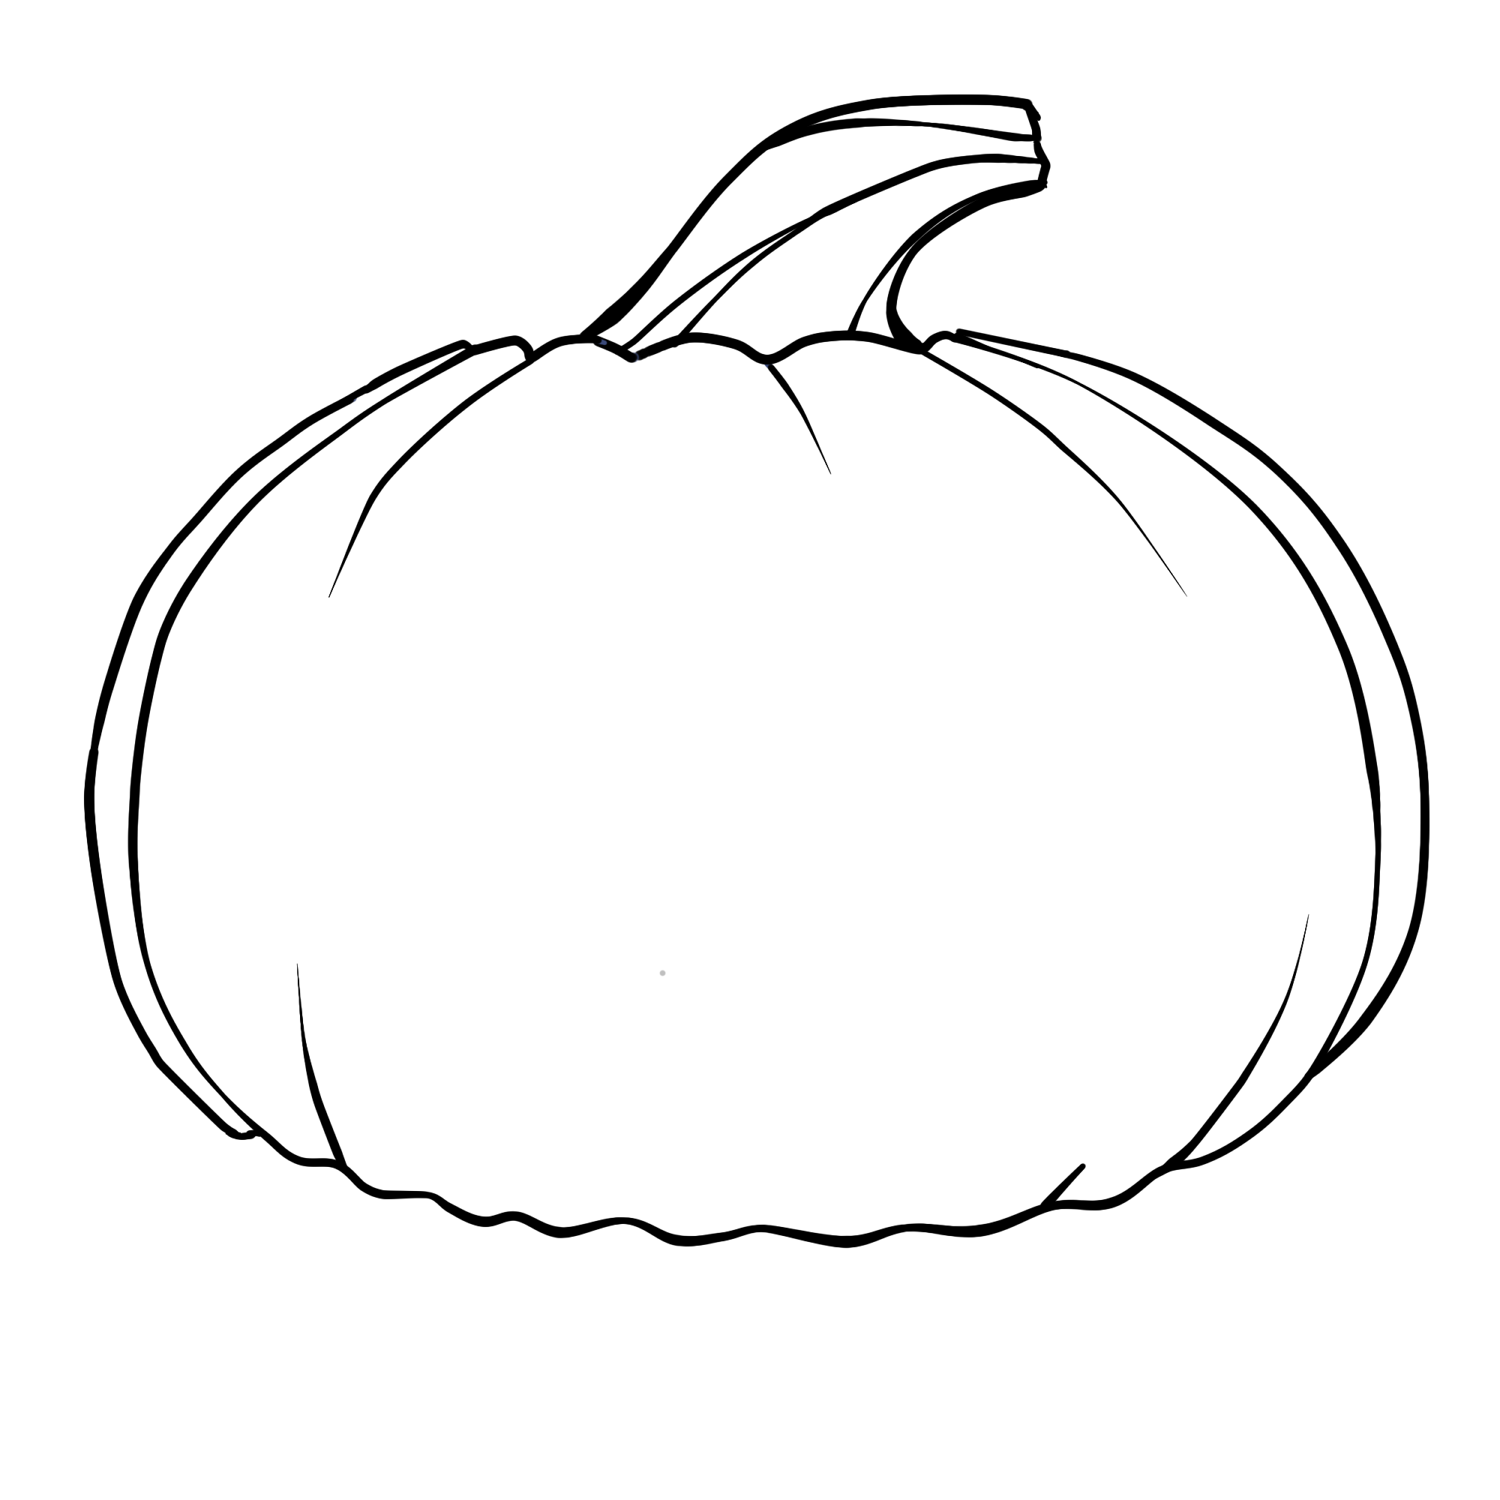 Alluring Pumpkins To Coloring Pages With Parents All Over The ...